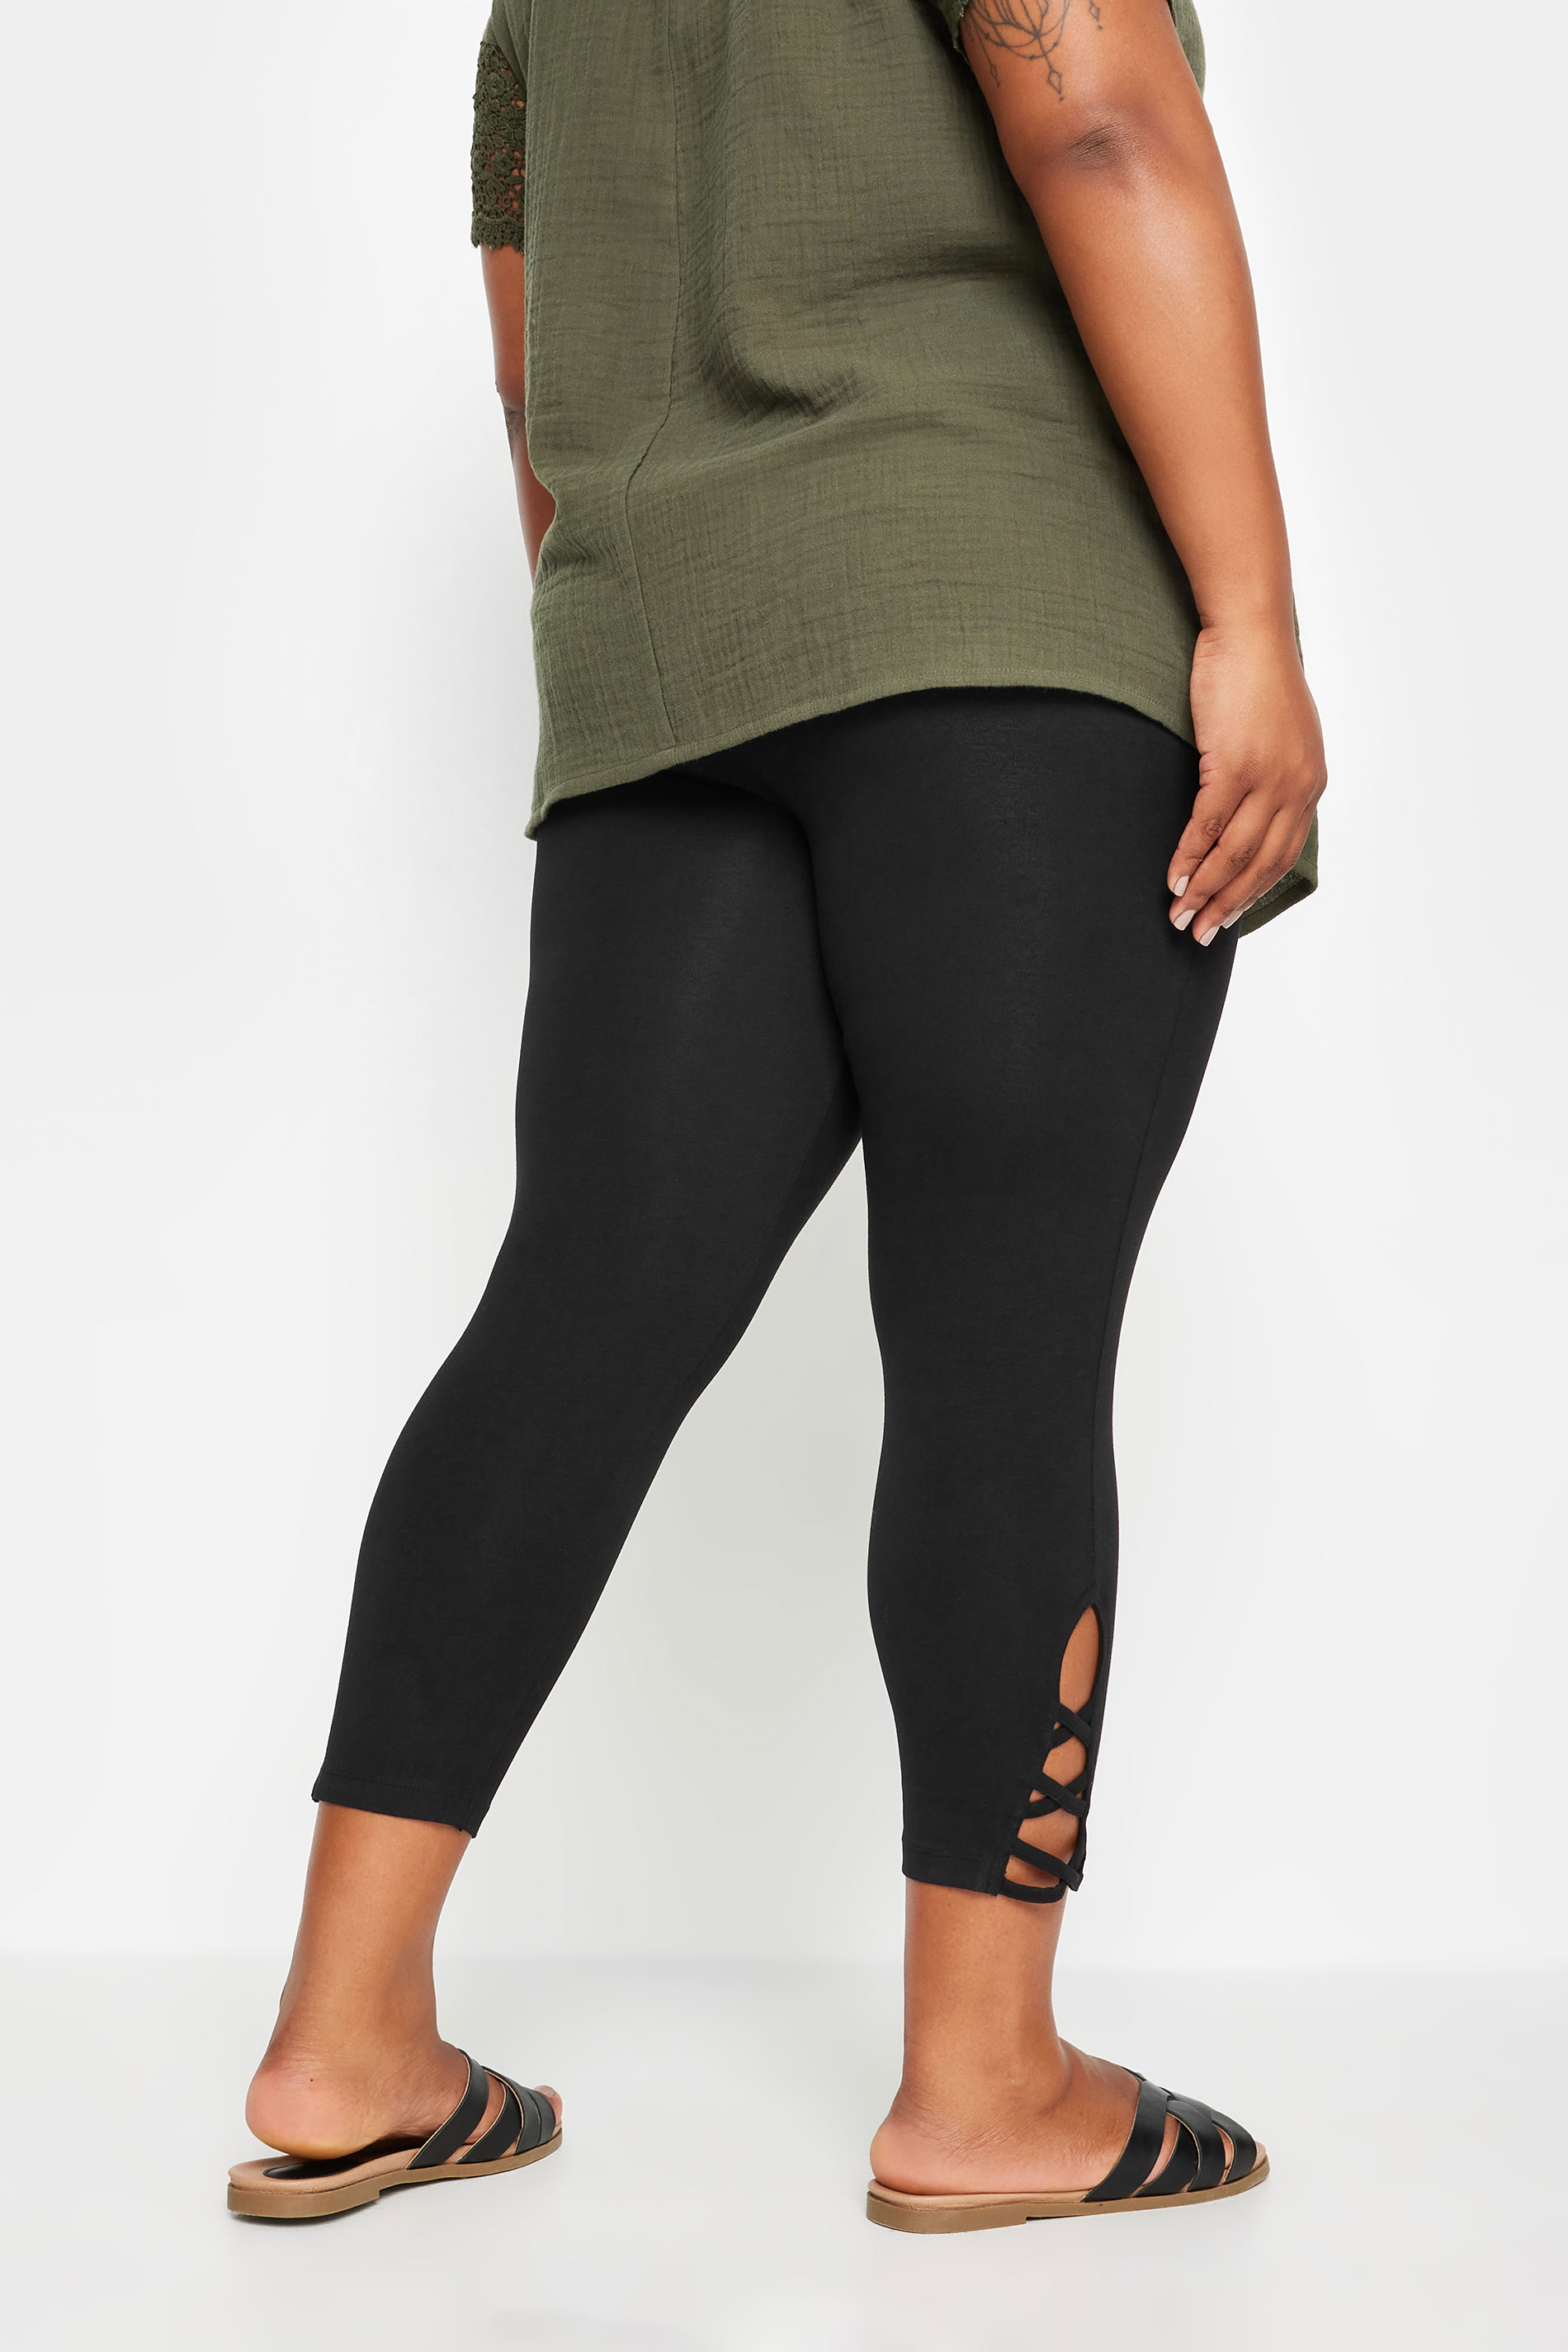 YOURS Plus Size Black Cut Out Cropped Leggings | Yours Clothing 3